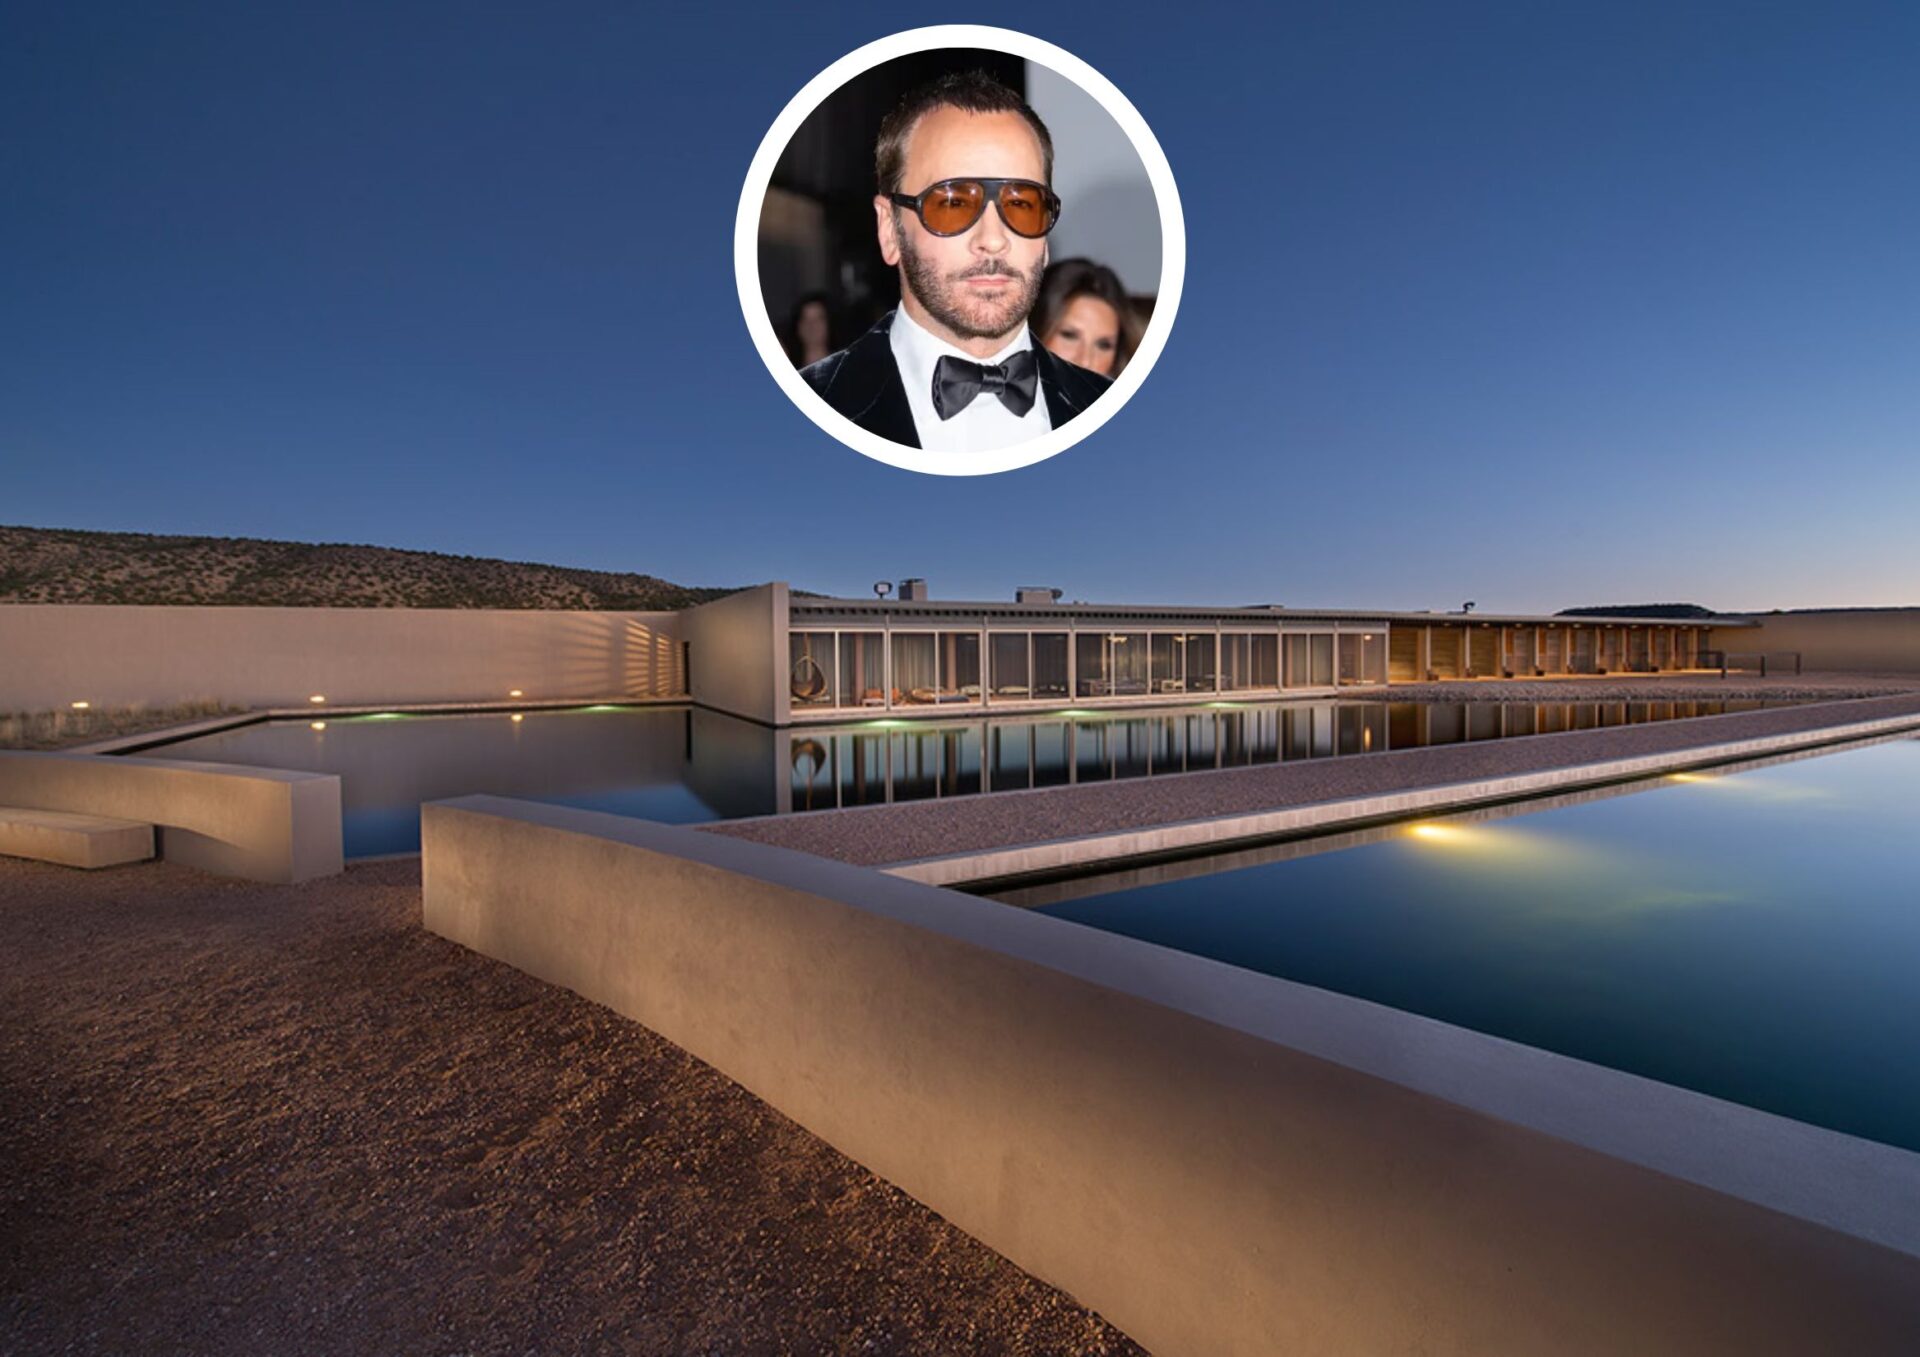 Main Image of Tom Ford's Ranch